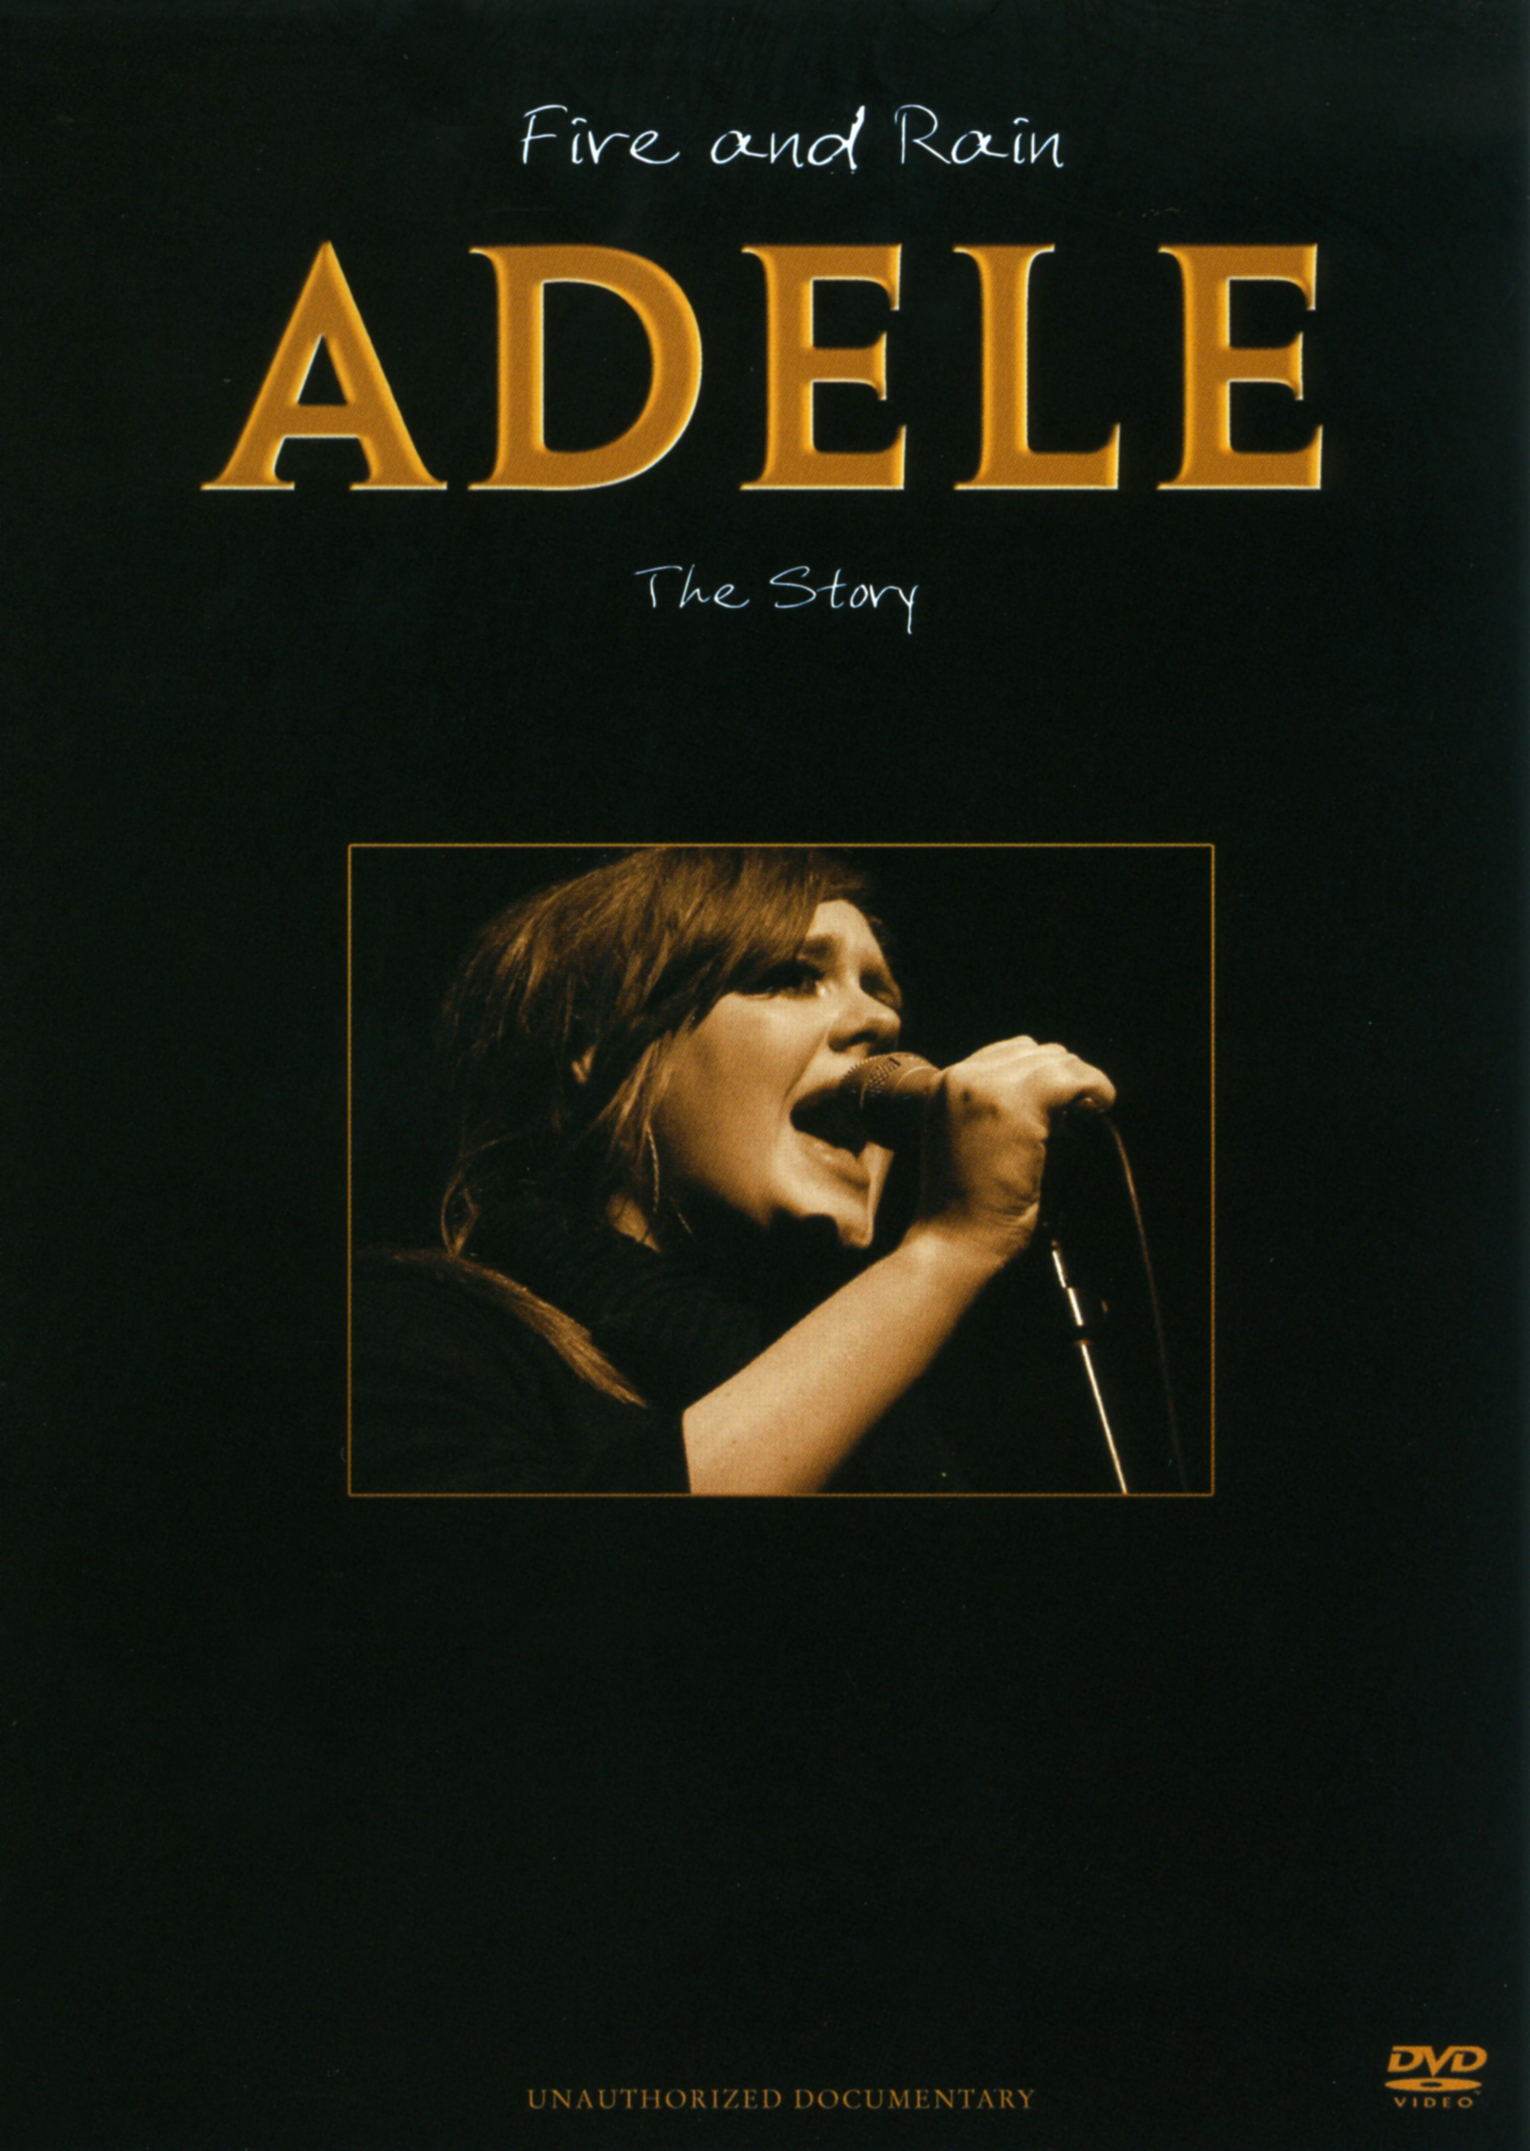  Adele: Fire and Rain - The Story [DVD]